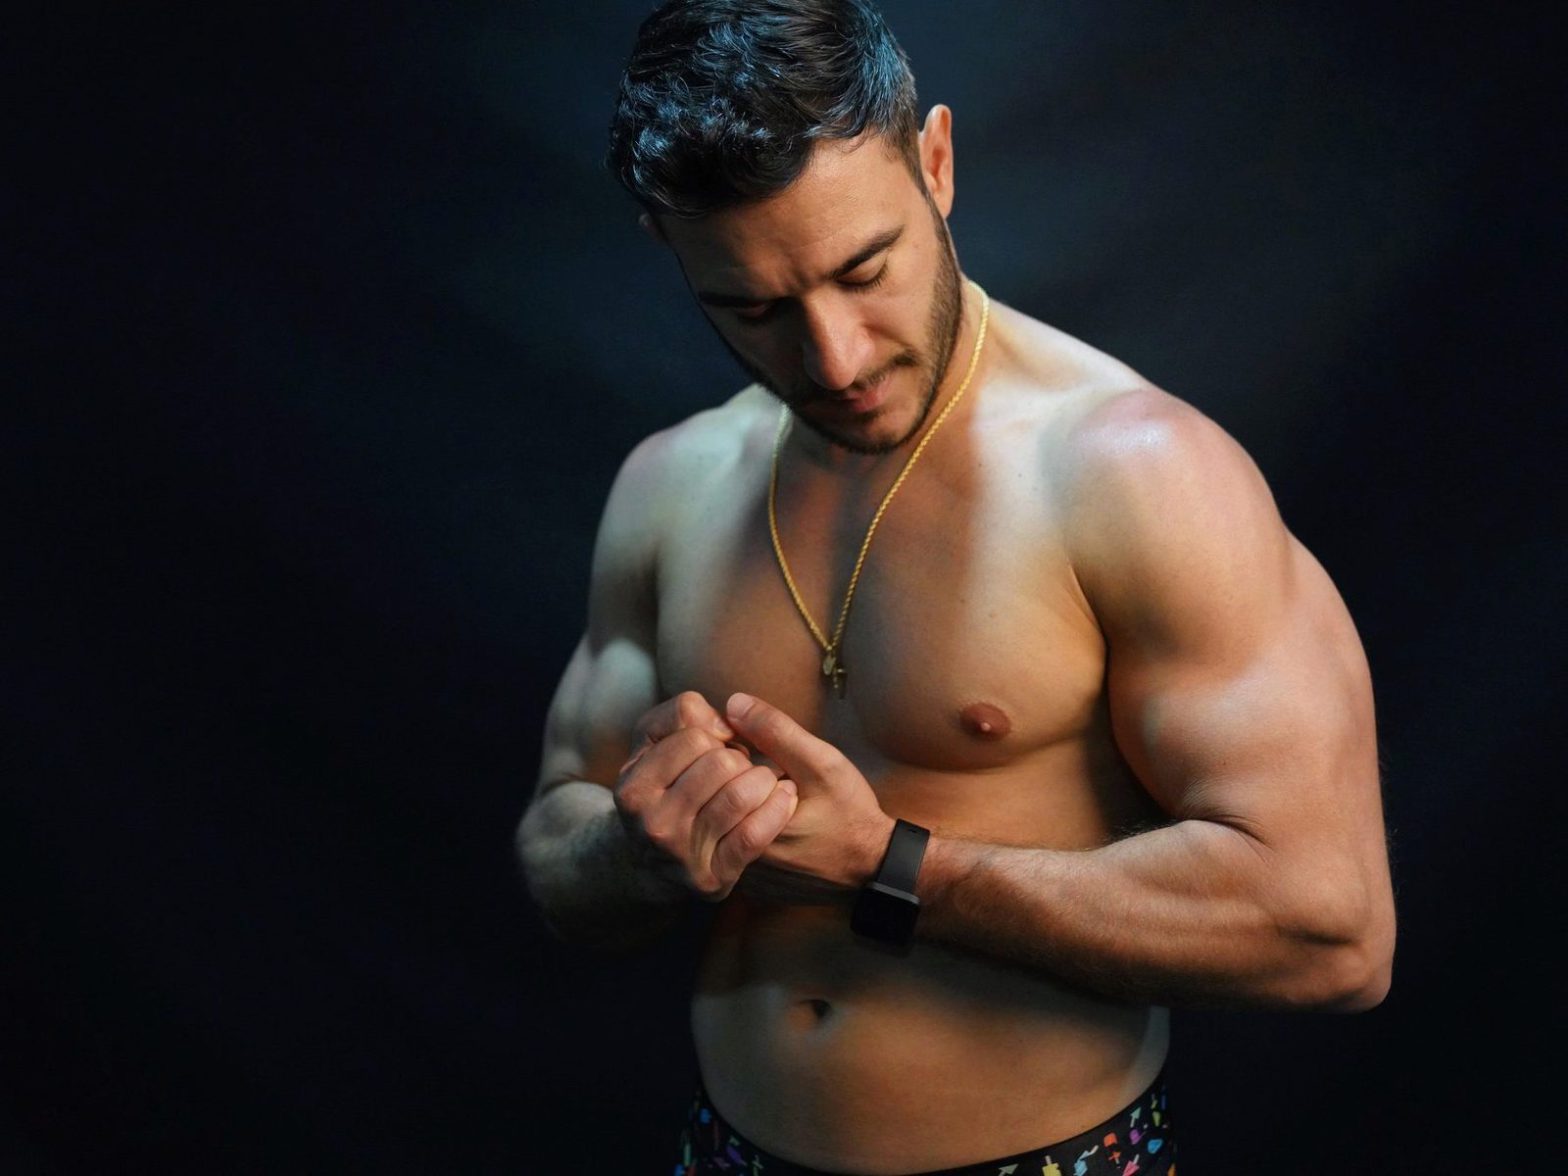 EXCLUSIVE: Salvatore D Talks 14 Years of Camming